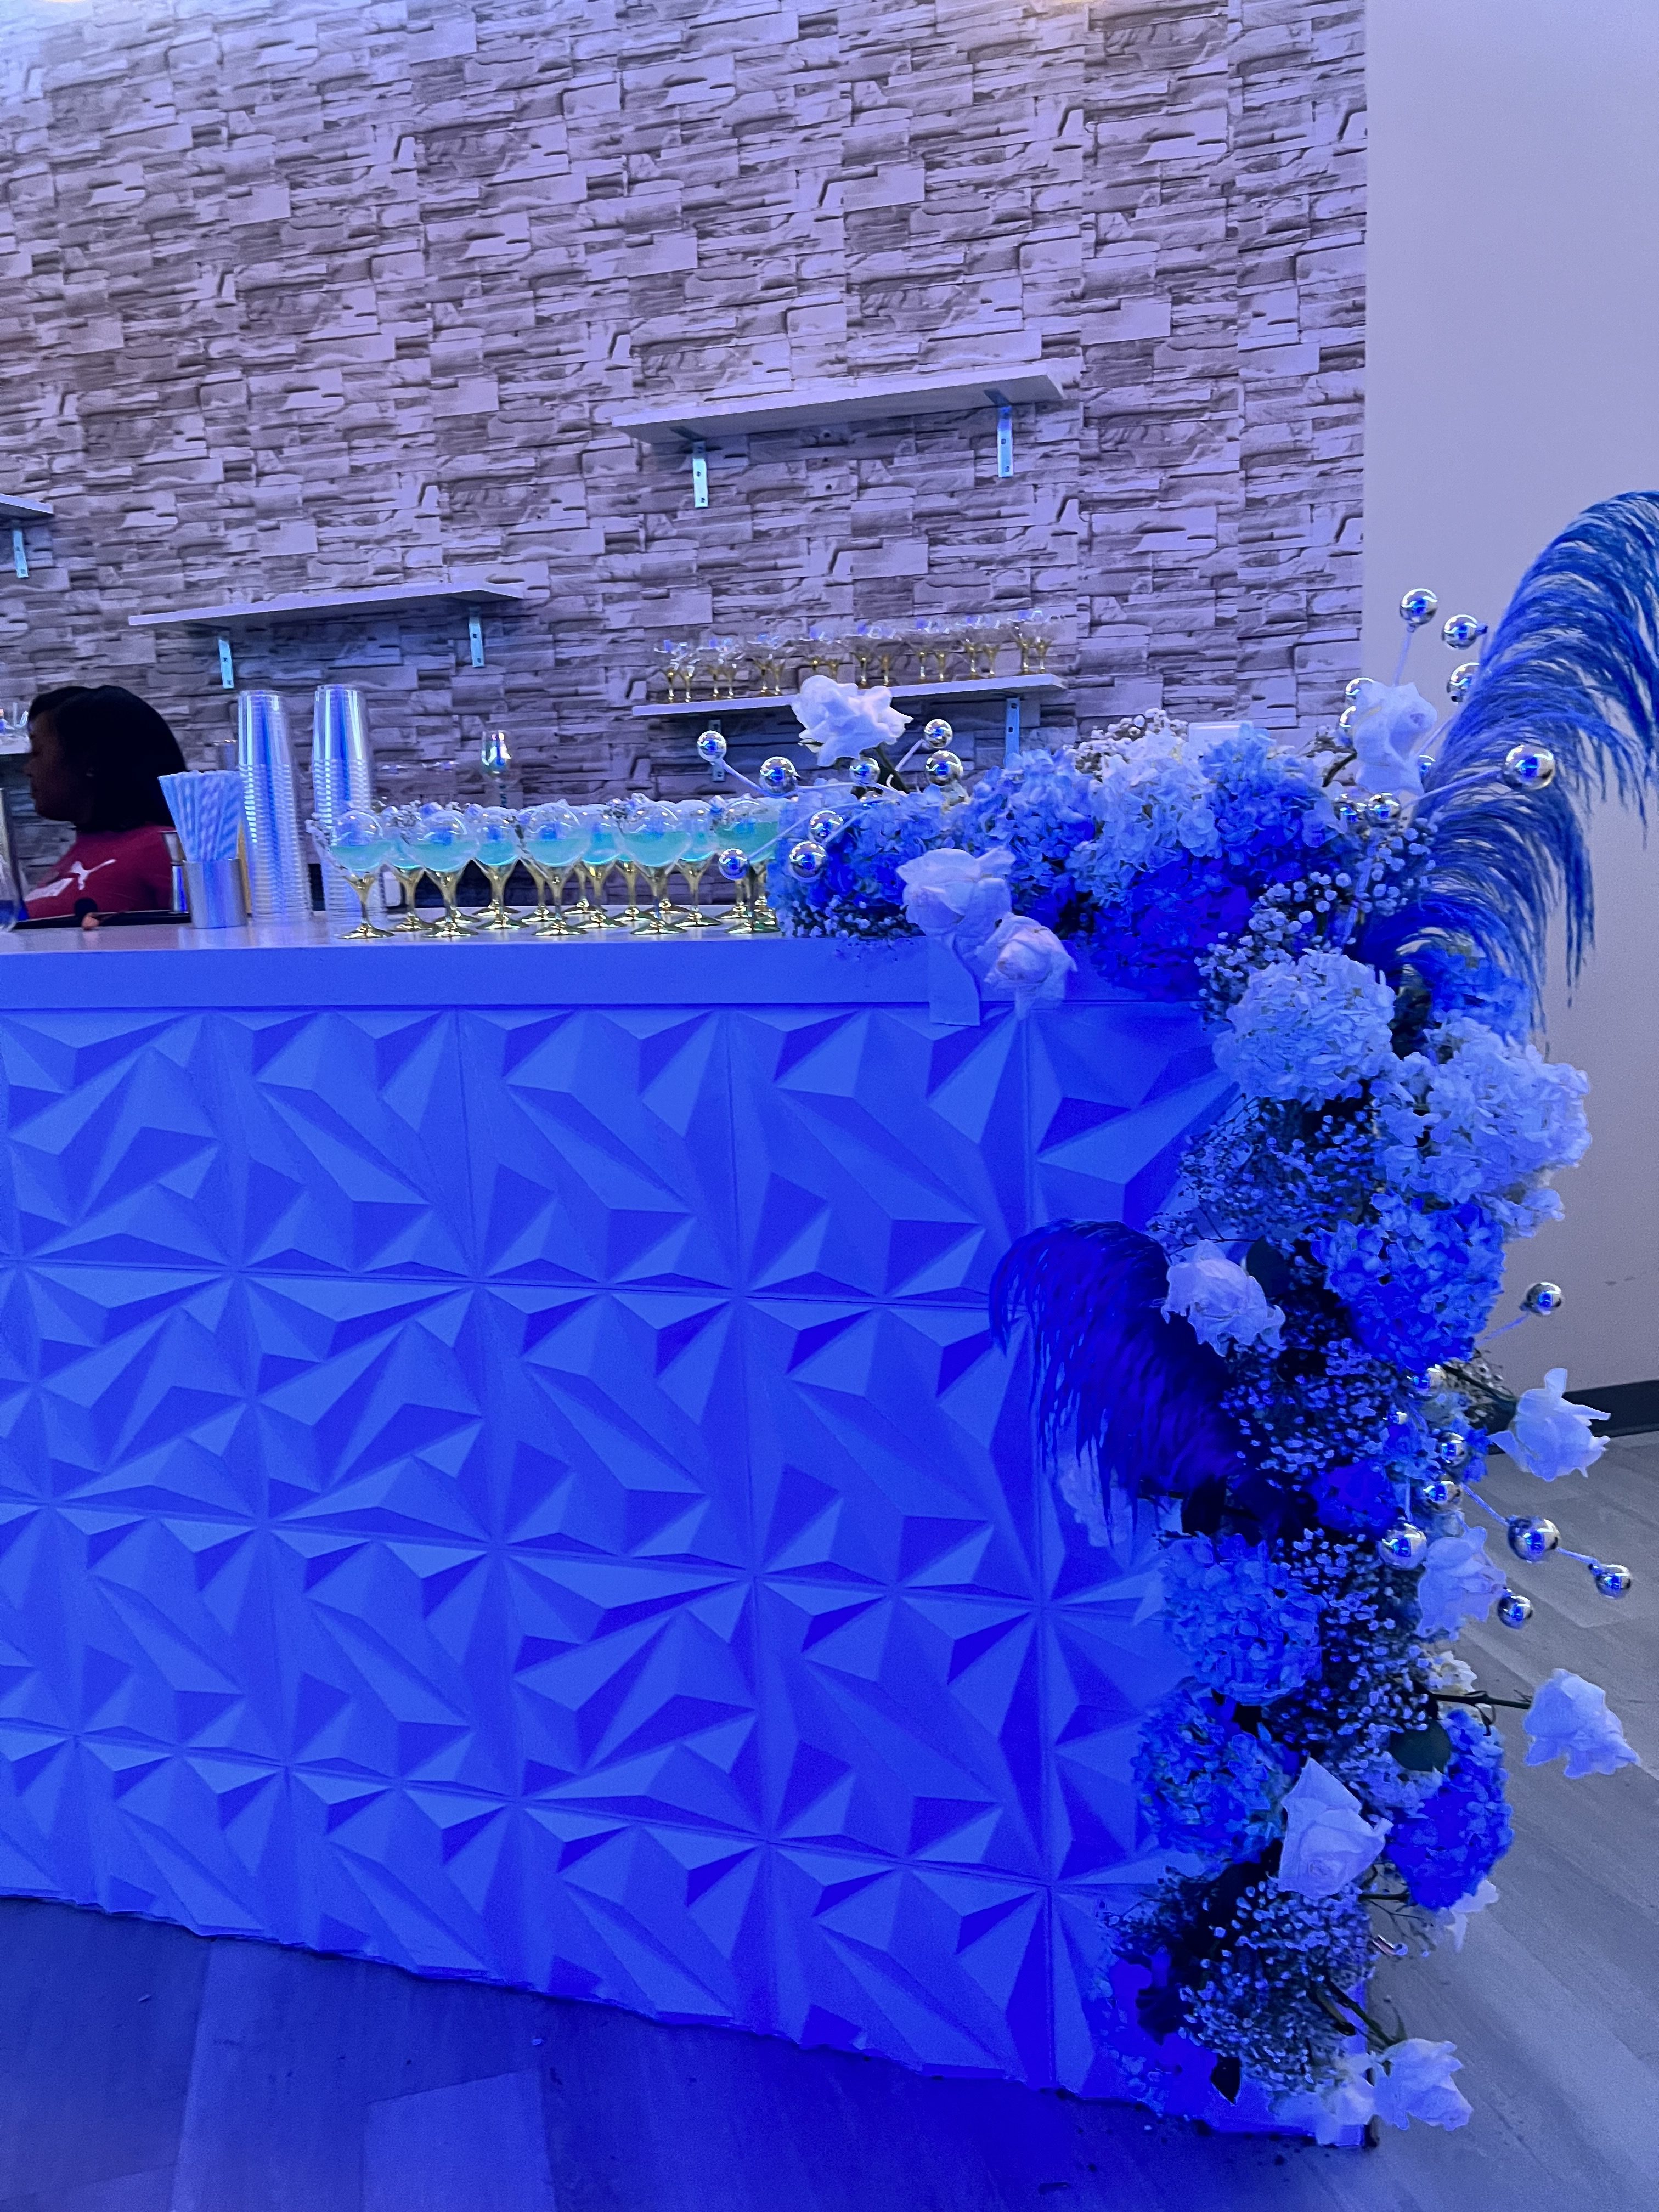 A reception desk adorned with vibrant blue and white flowers, under blue lighting, against a textured stone wall backdrop. a staff member is present behind the desk.